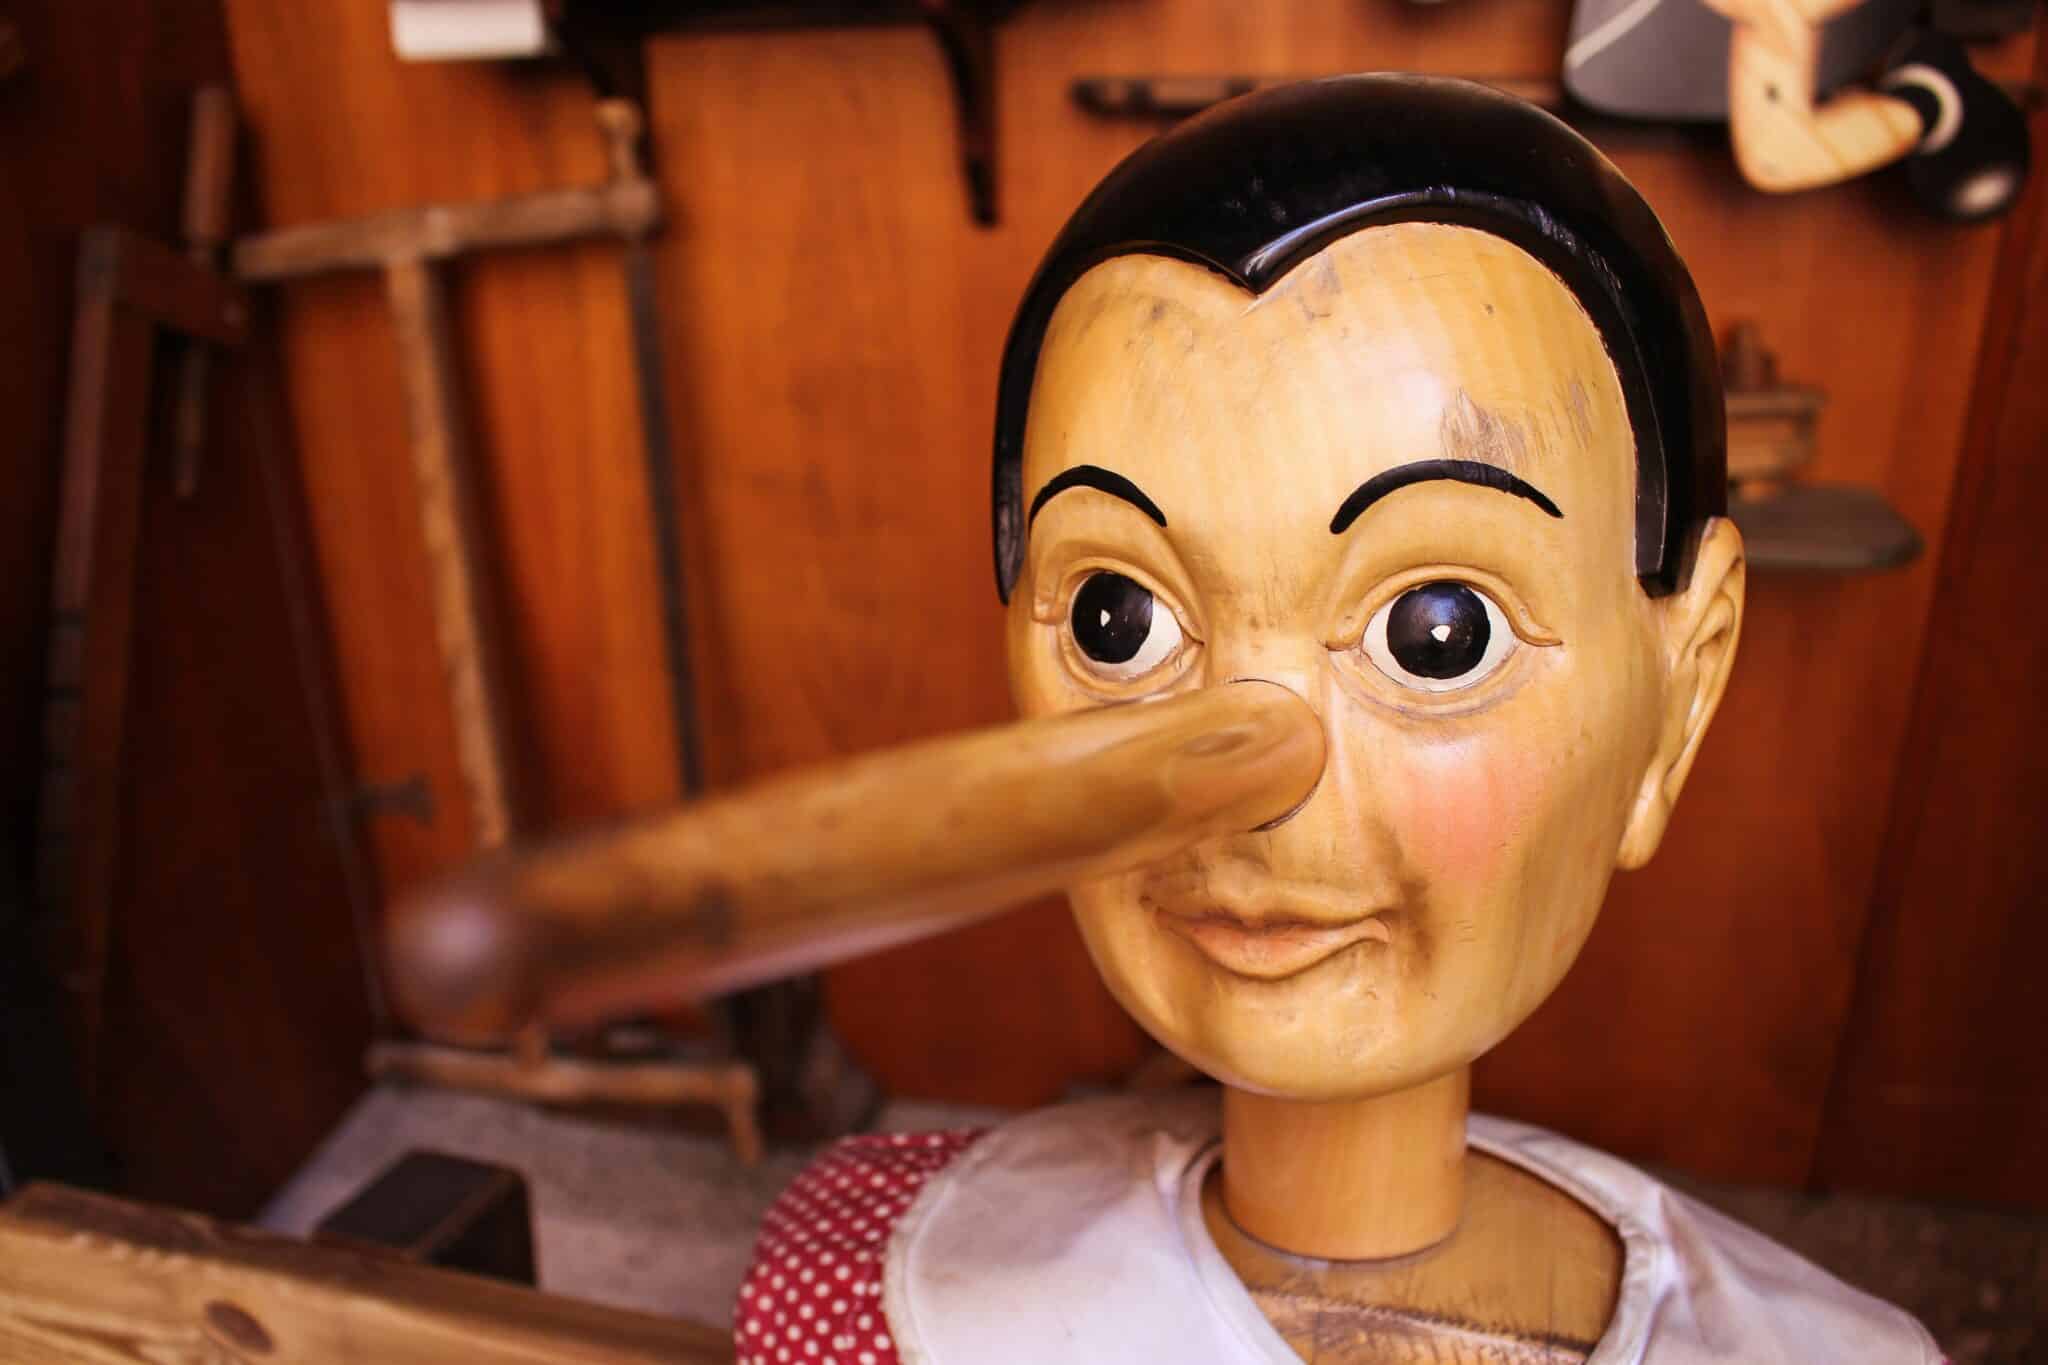 A wooden Pinocchio doll with an elongated nose